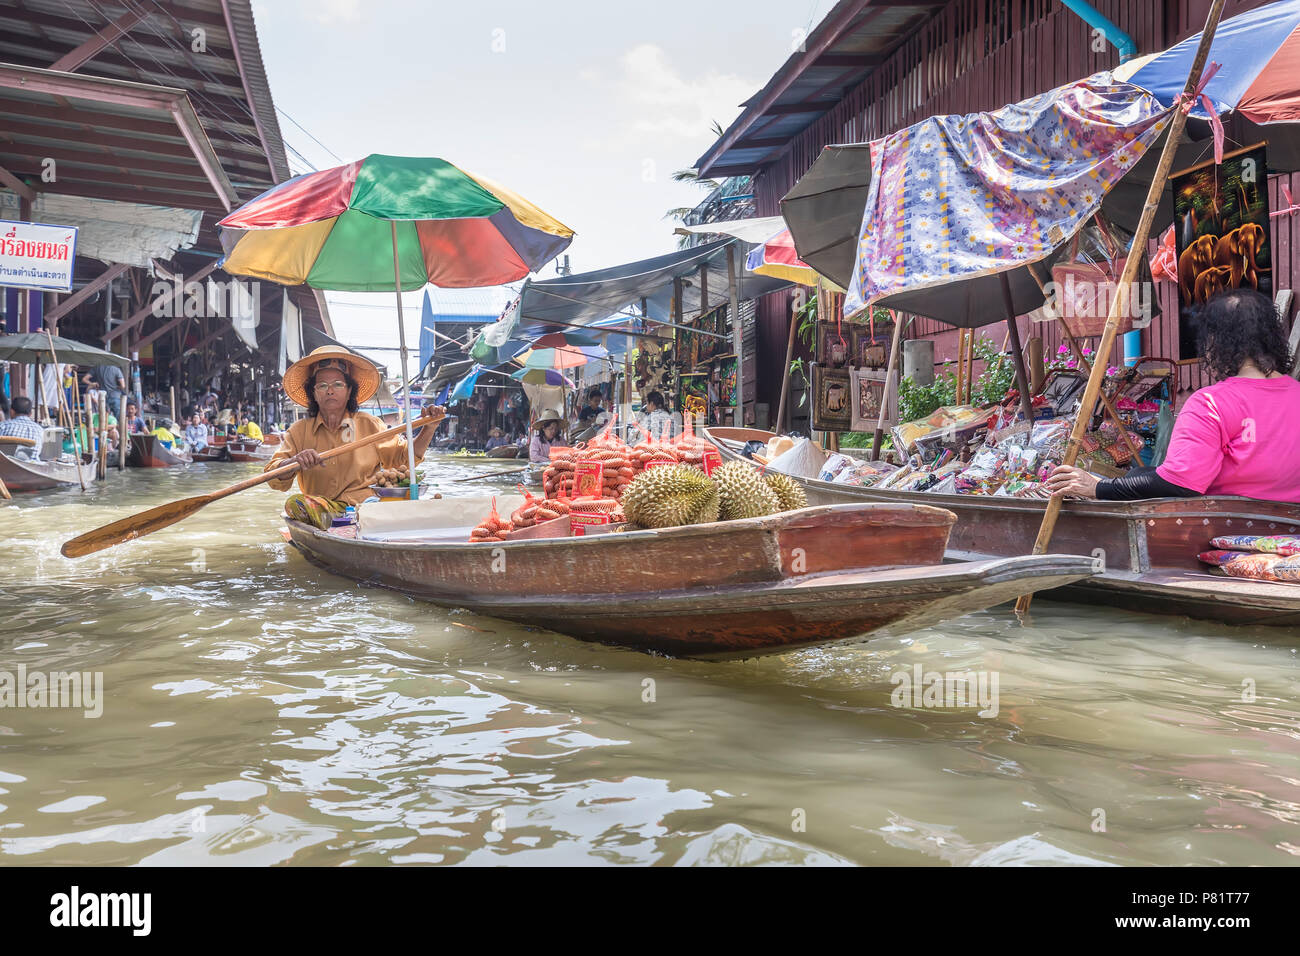 Woman selling food from boat, Tha Kha Floating Market, Thailand Stock Photo